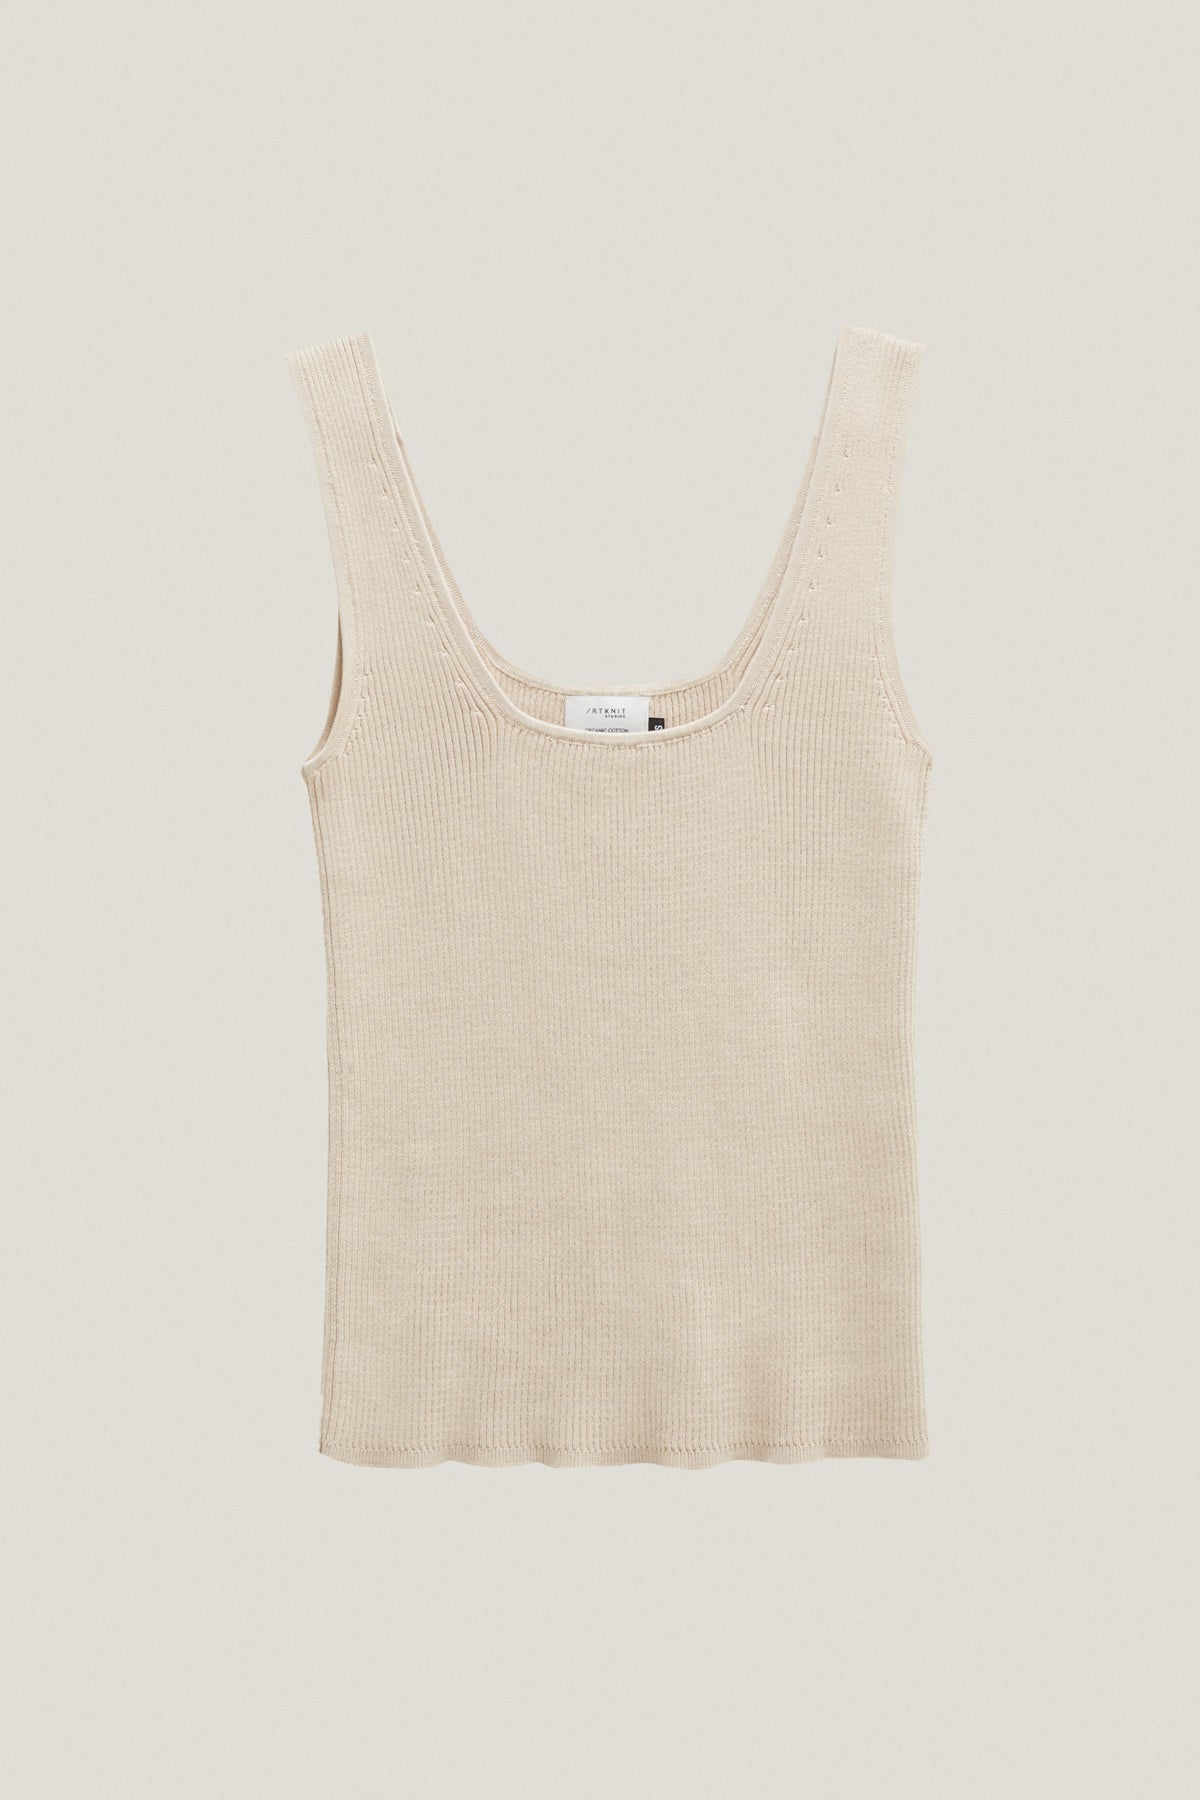 the organic cotton ribbed tank top imperfect version 22 beige